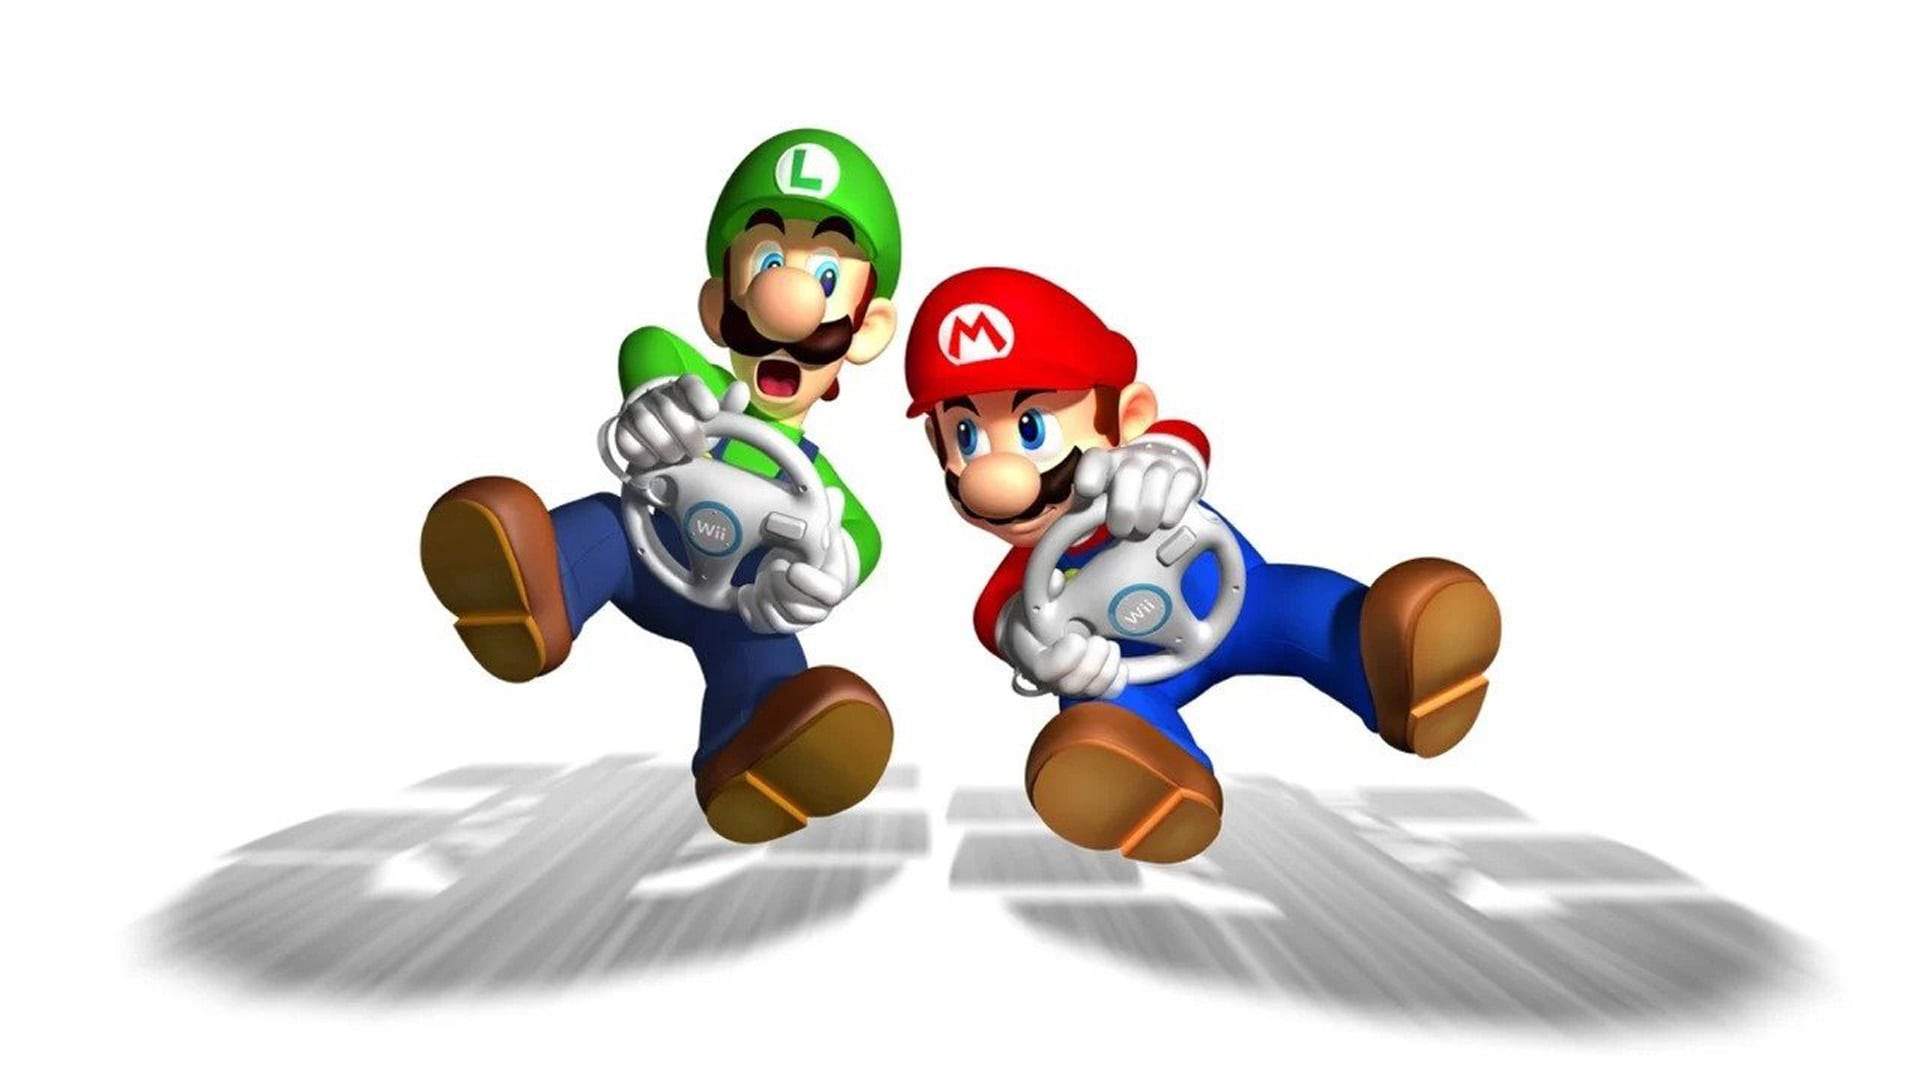 Exciting race scene with various characters from Mario Kart Wii game